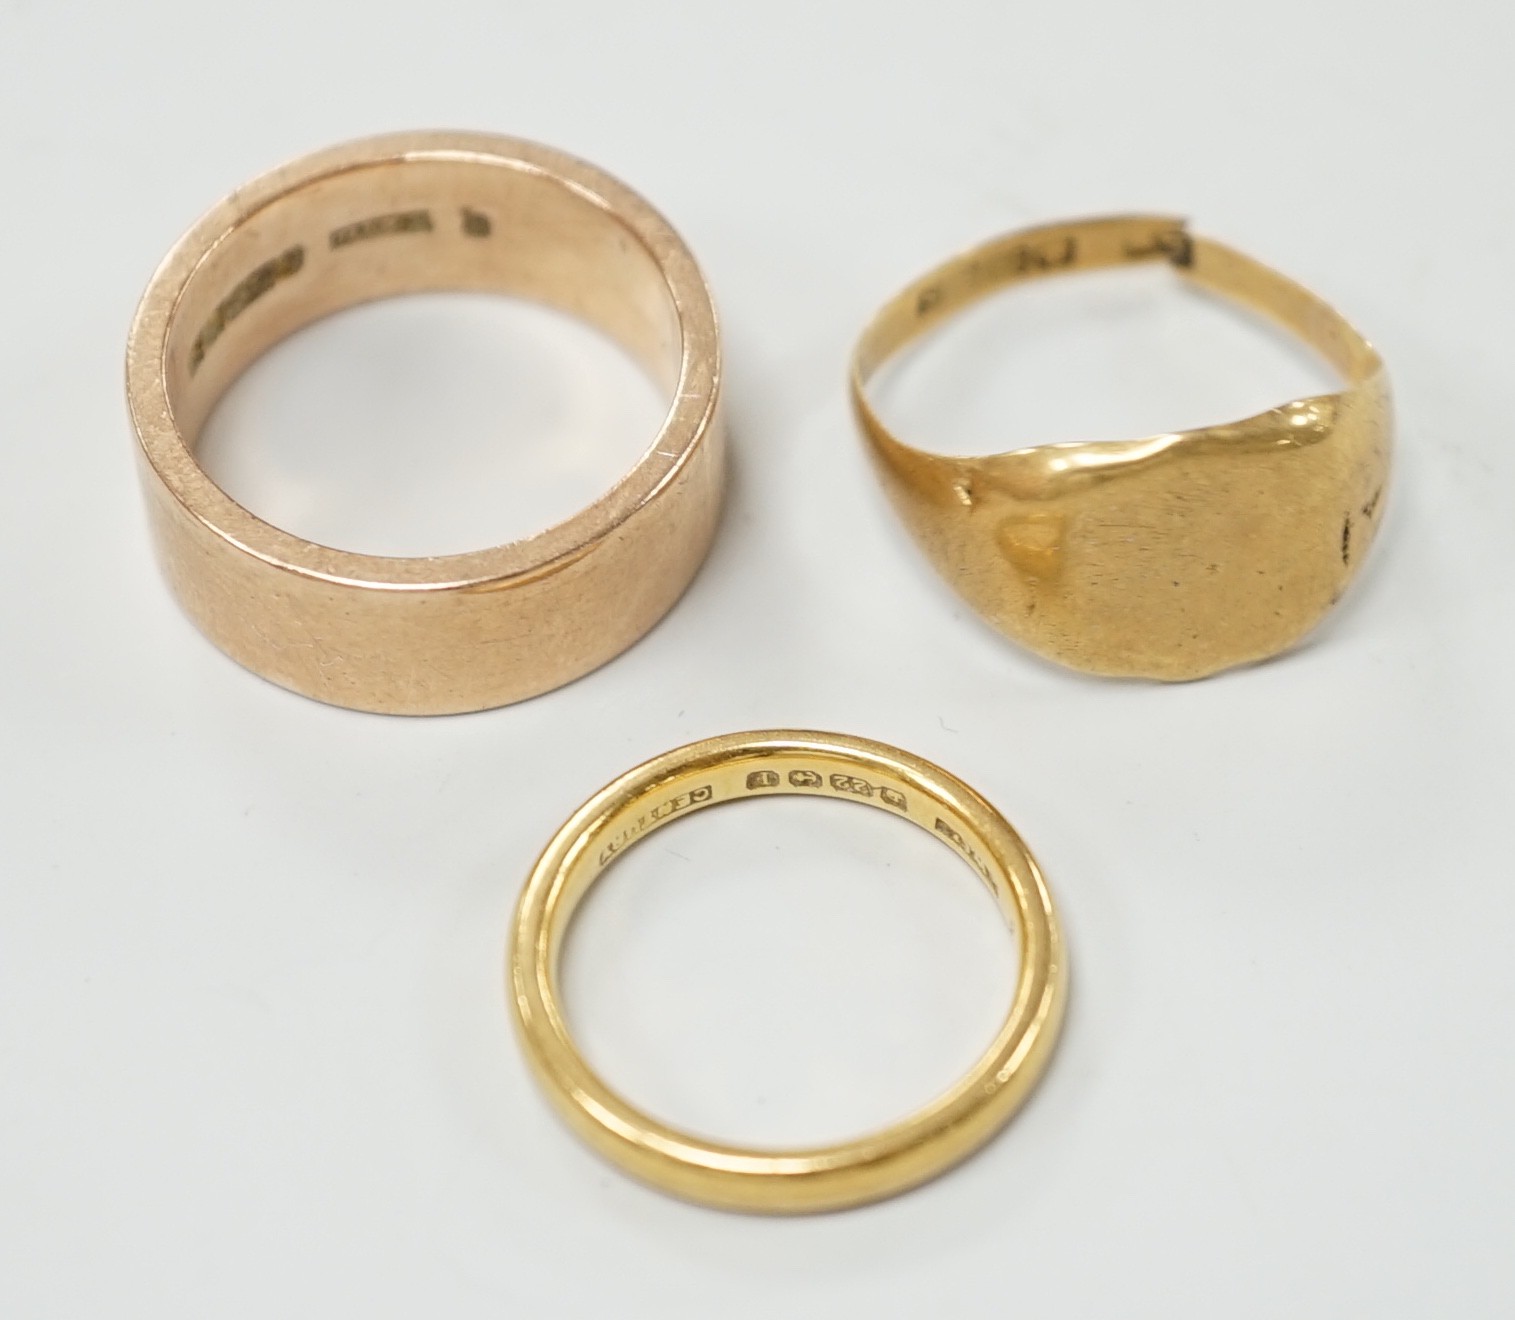 A 1930's 22ct gold wedding band, size K, 4.1 grams, a 9ct gold wedding band, size Q, 9.3 grams and a broken 18ct gold signet ring, 2.9 grams.